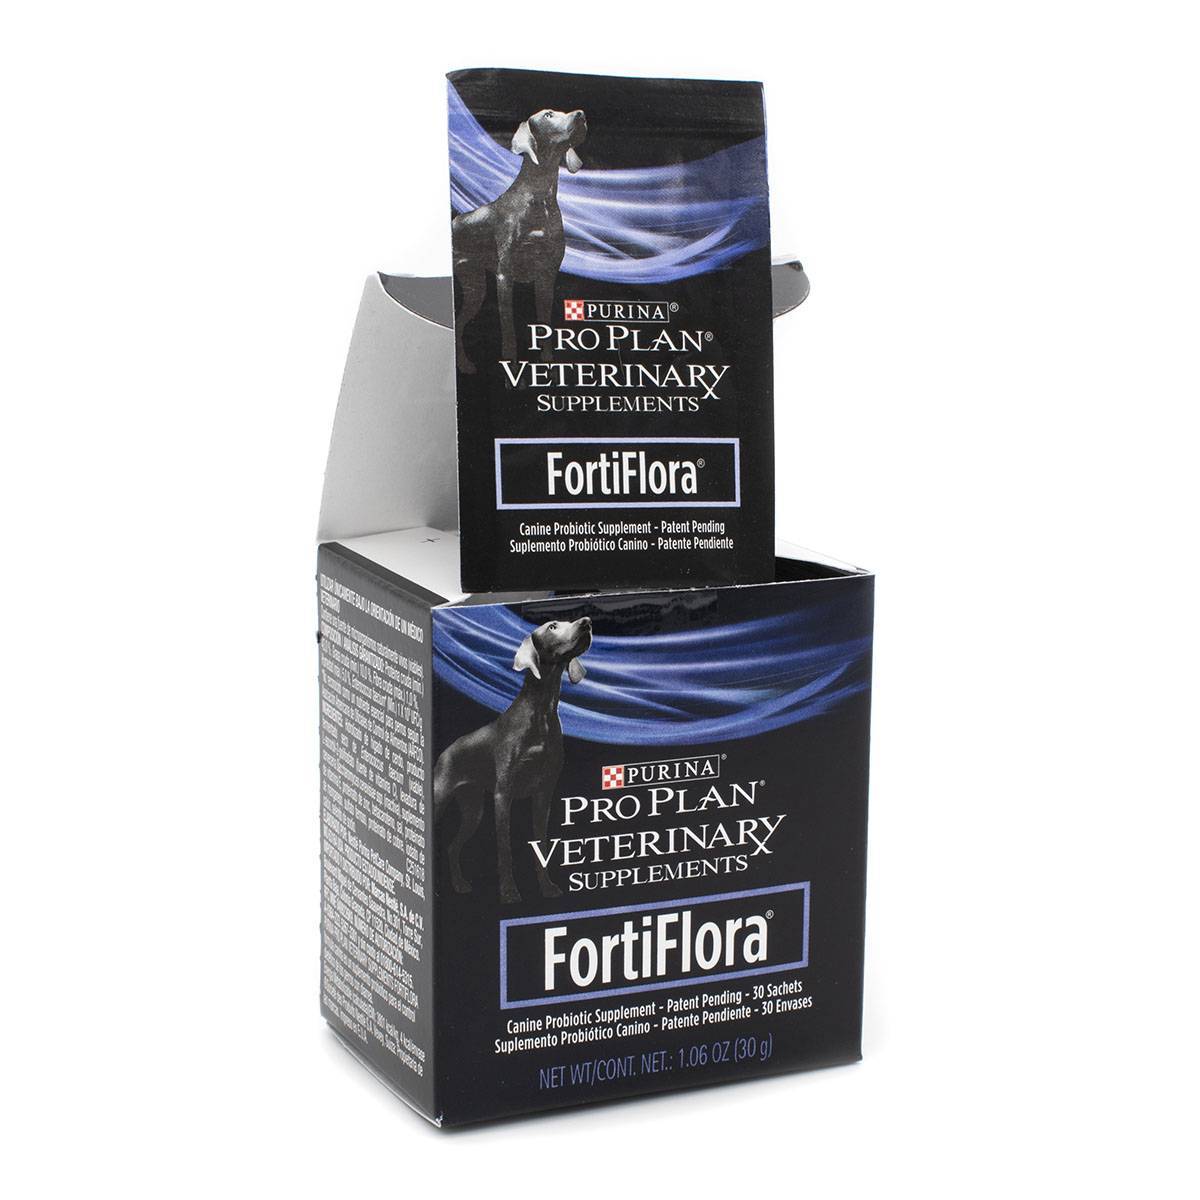 How Does Fortiflora Work